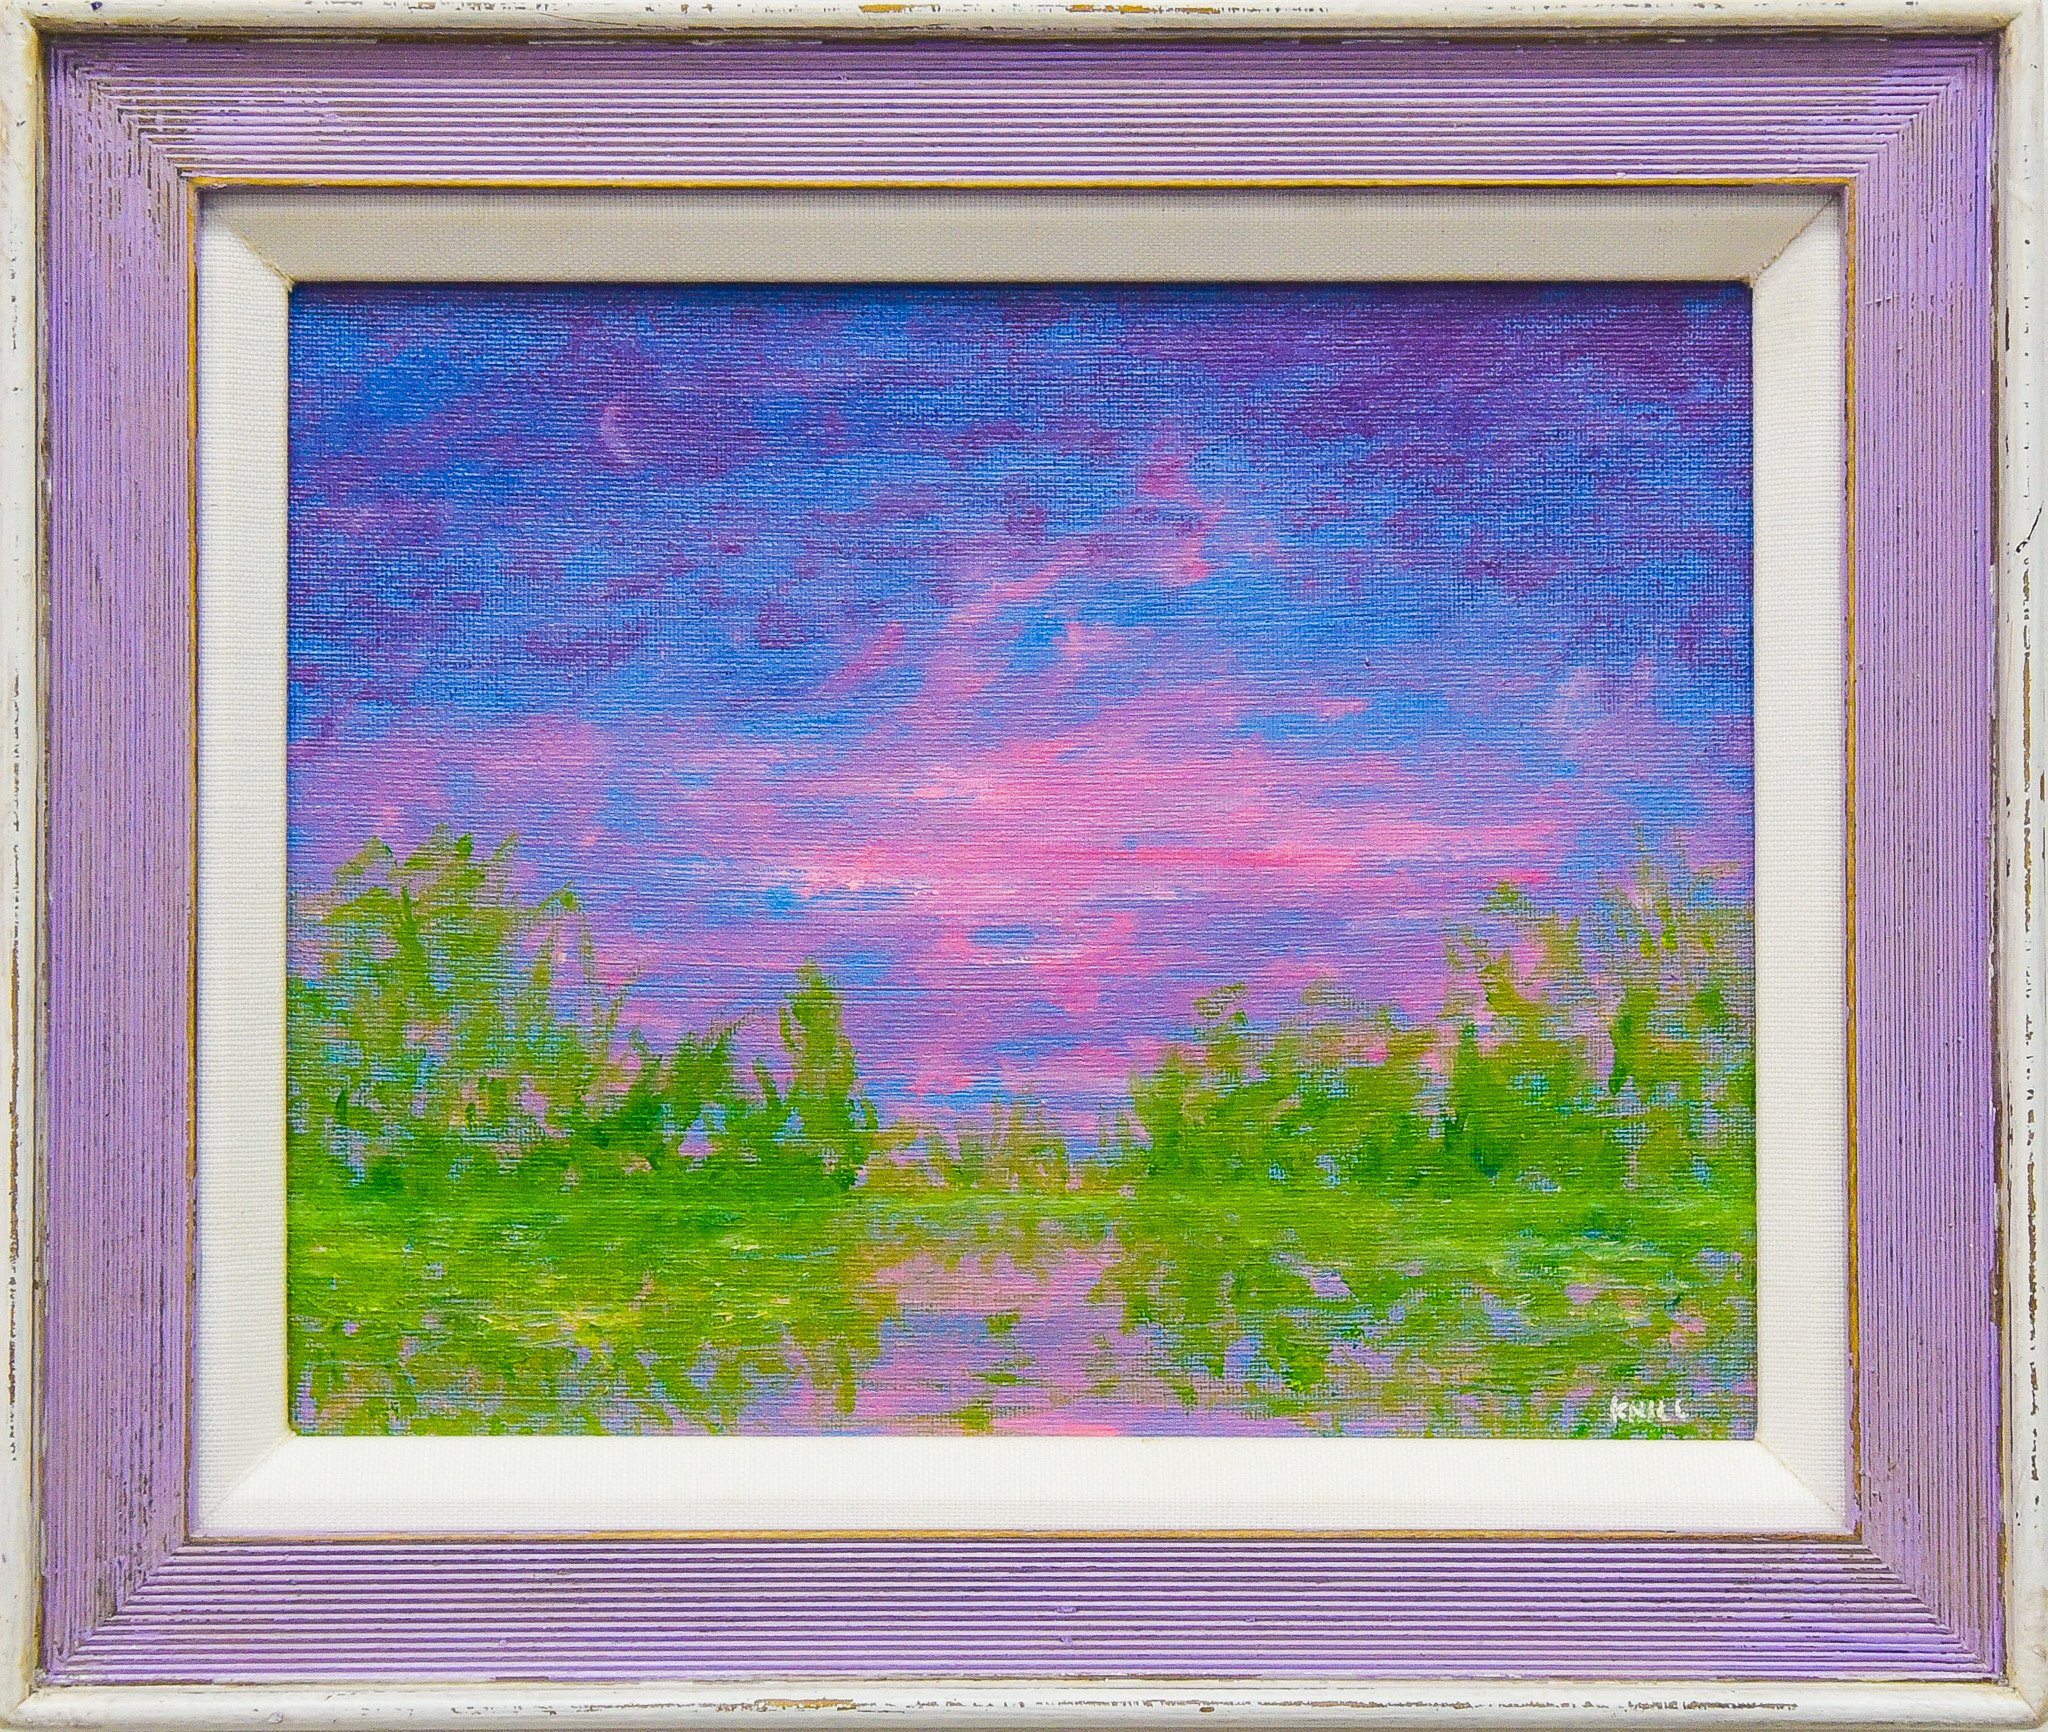  Rustic lavender  Painting by James Knill 